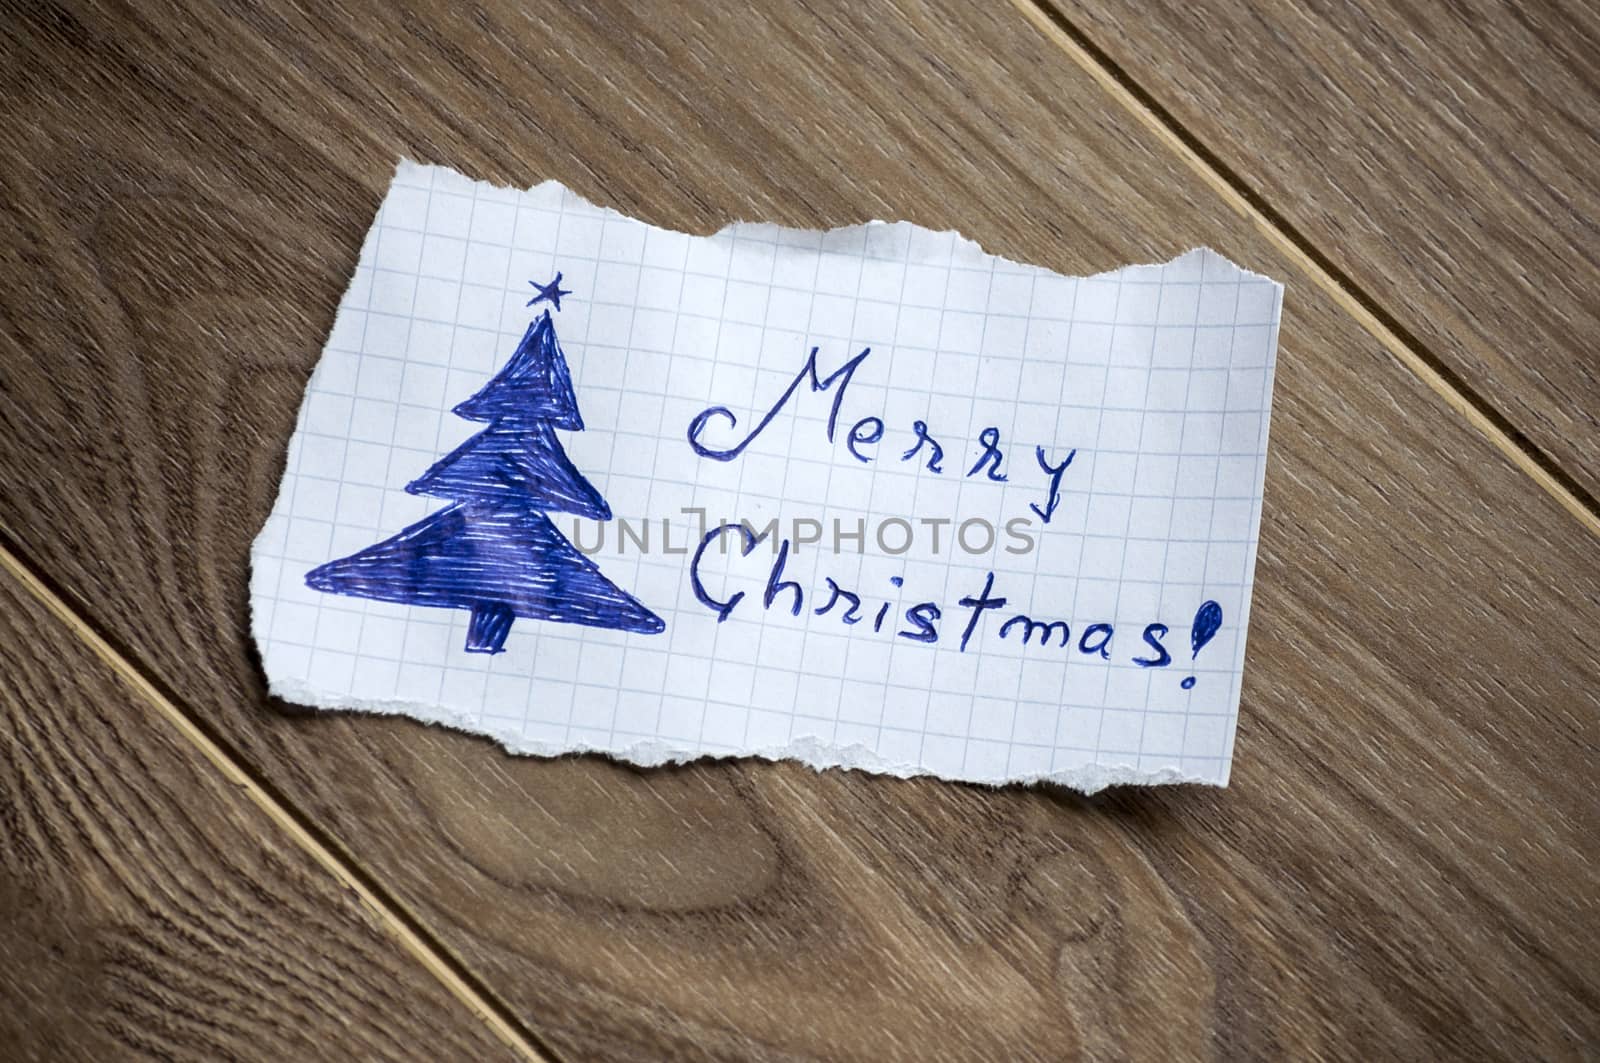 Merry Christmas written on piece of paper, on a wood background.